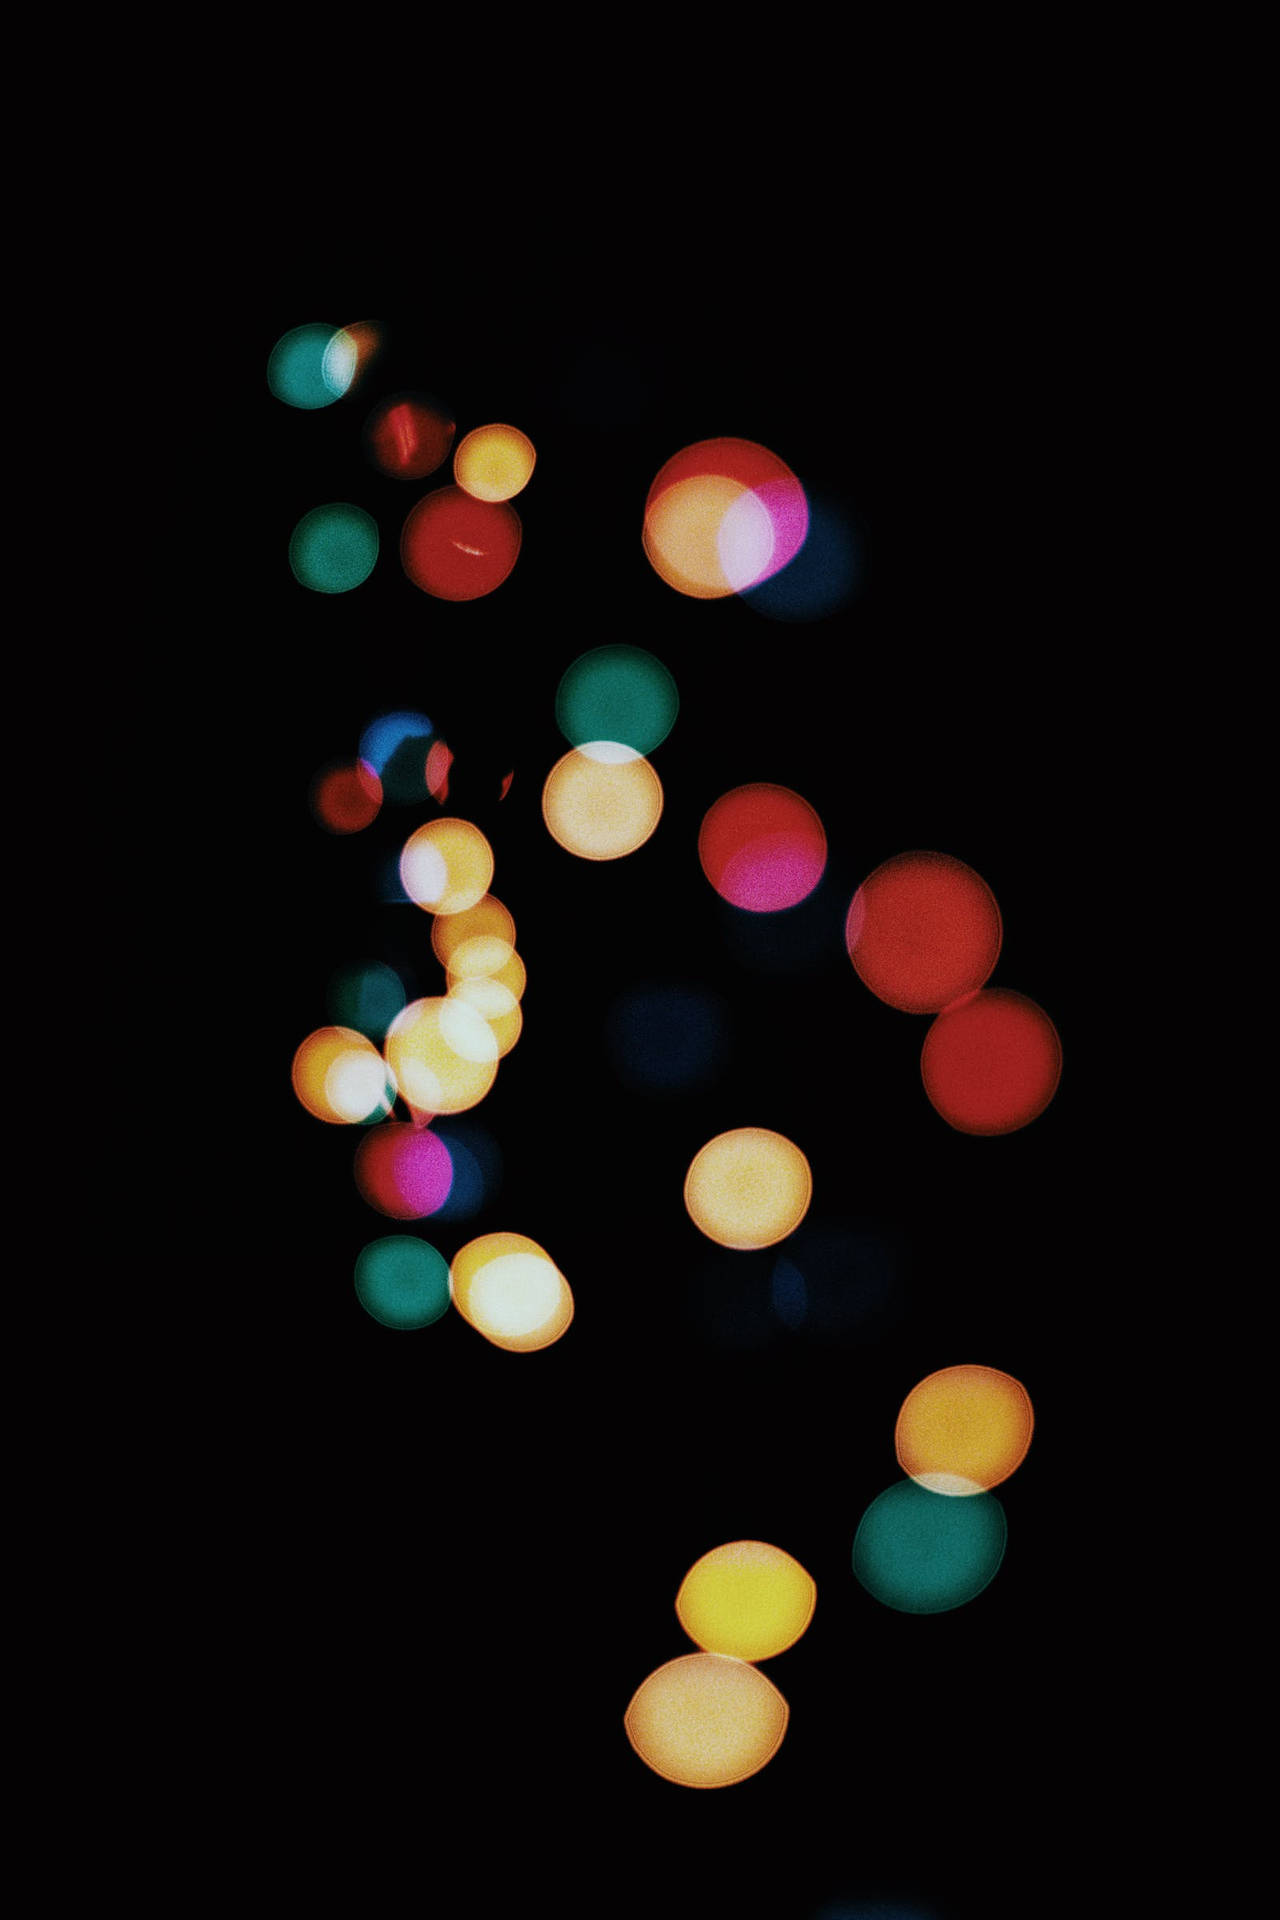 Colorful Bokeh Pattern For Phone Background